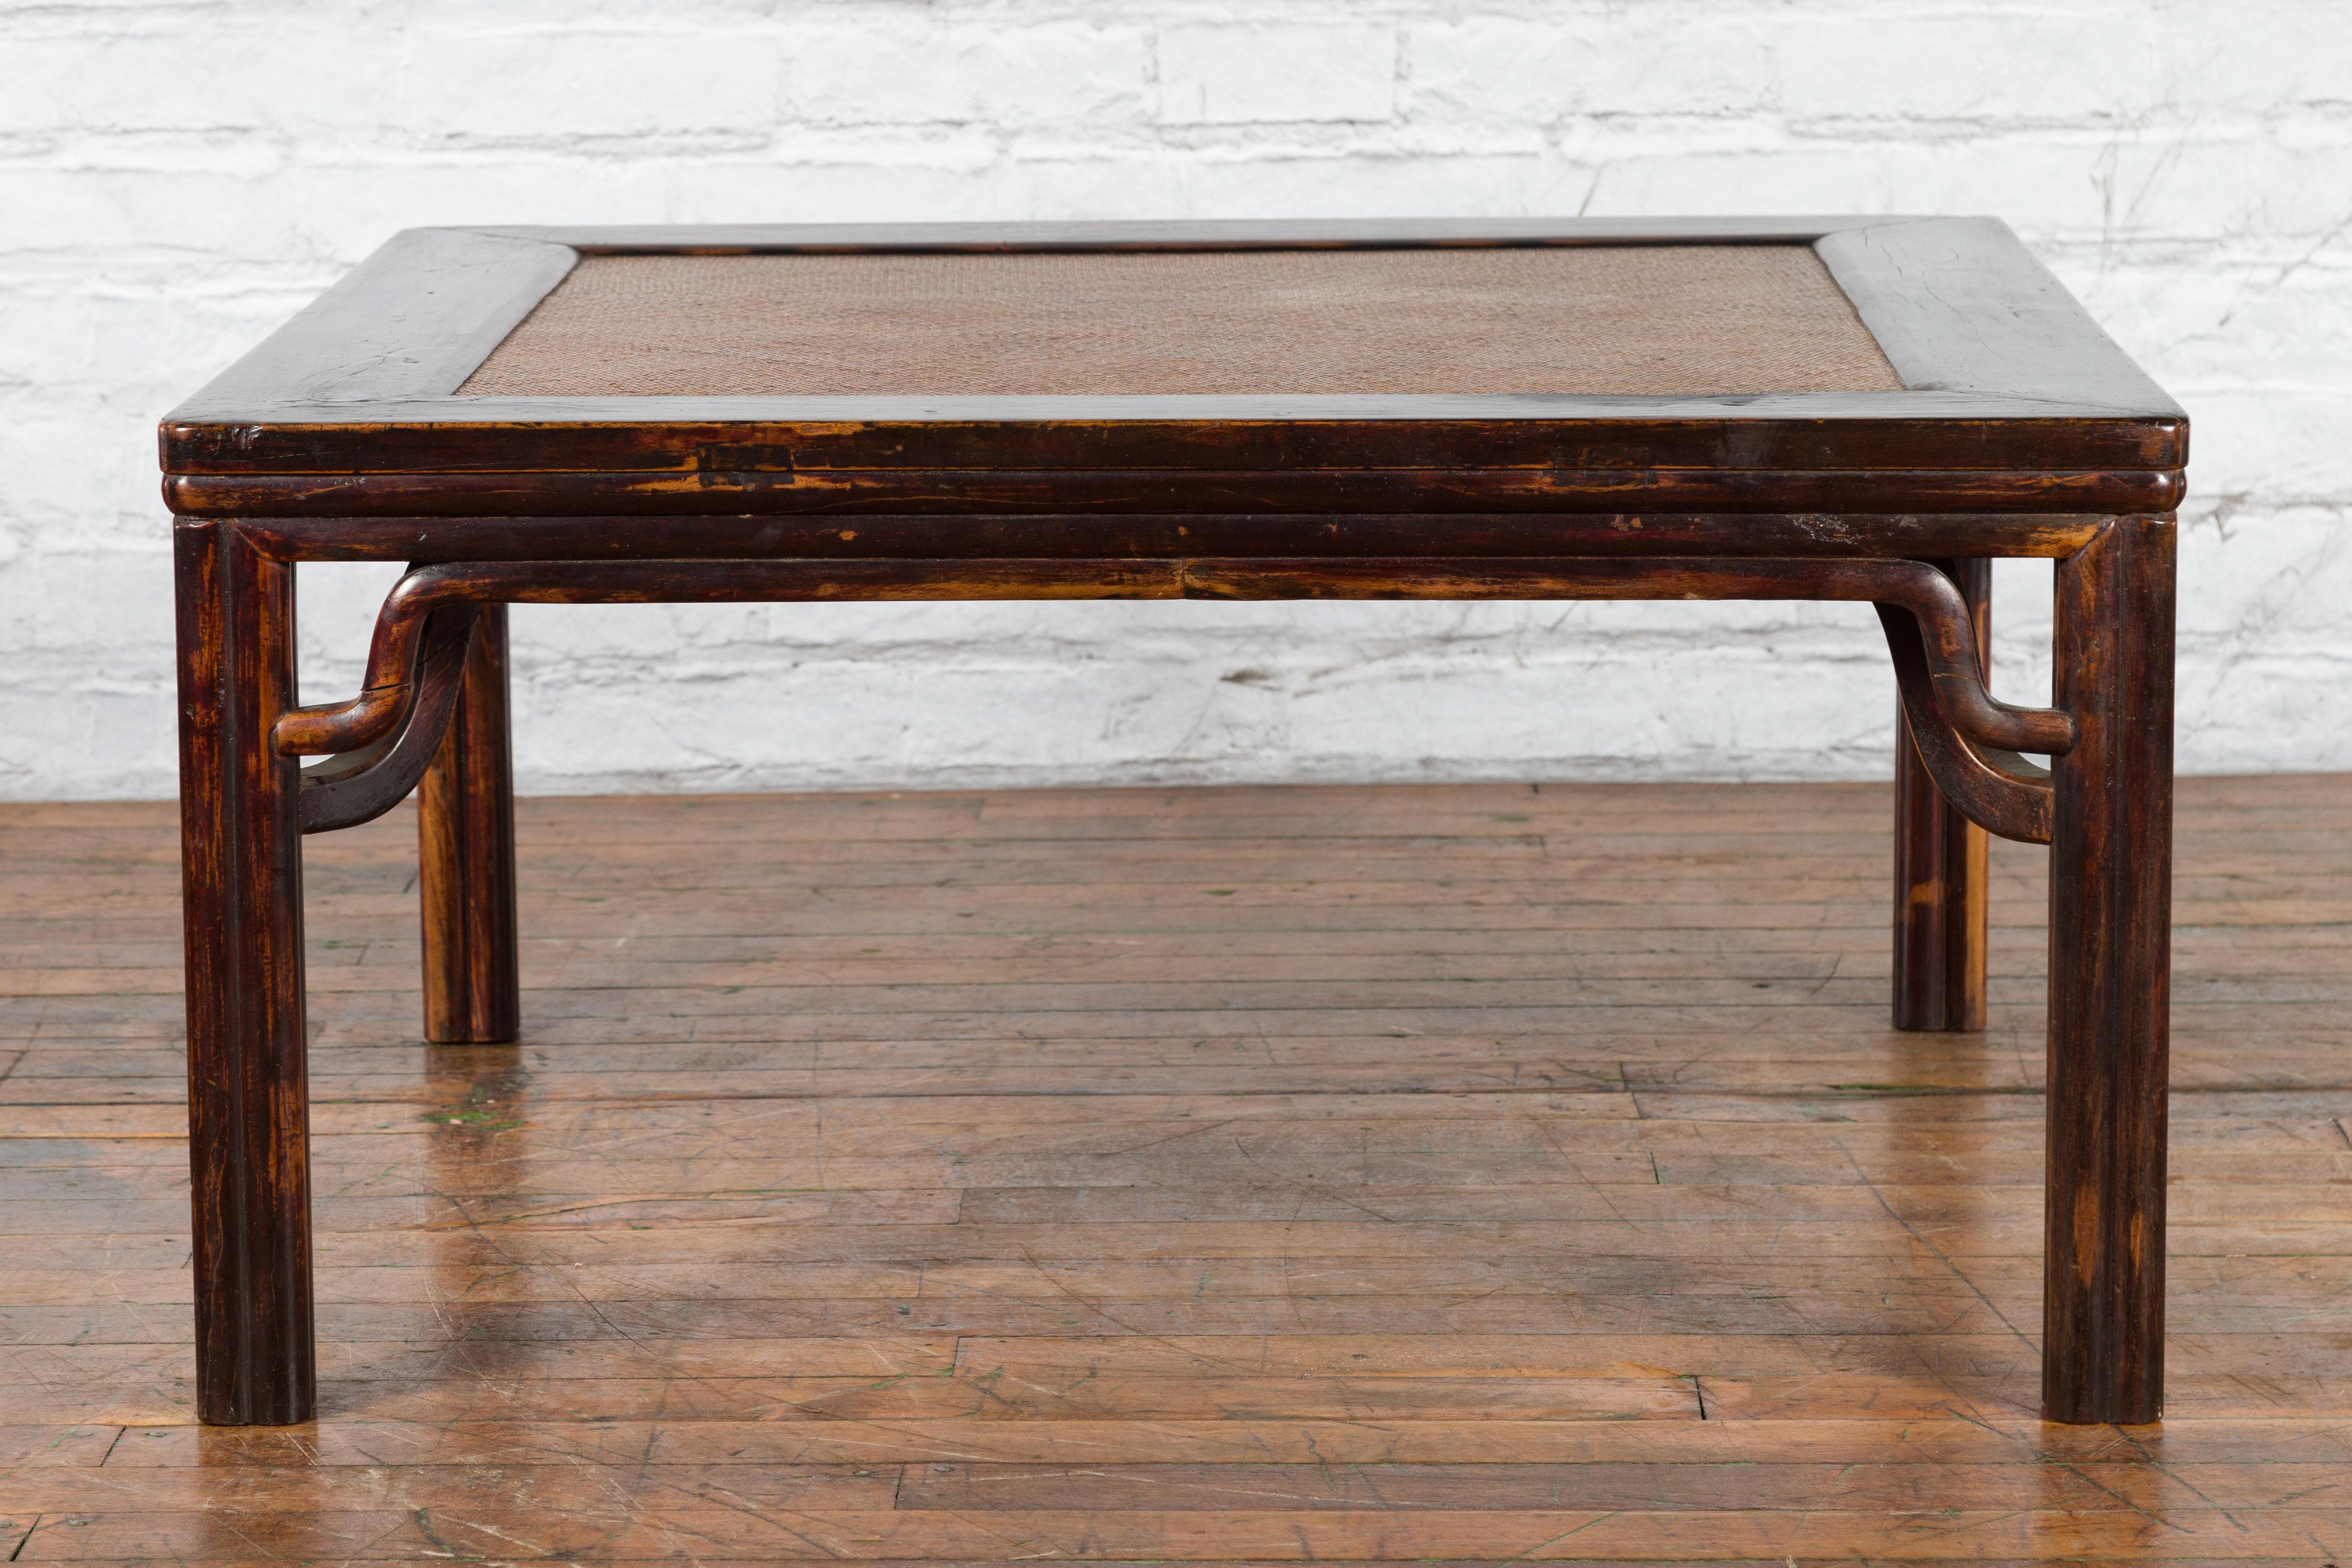 A Chinese Ming Dynasty style square-shaped wooden coffee table from the 19th century, with original distressed finish and hand-woven rattan top. Created in China during the Qing Dynasty period in the 19th century, this coffee table features the